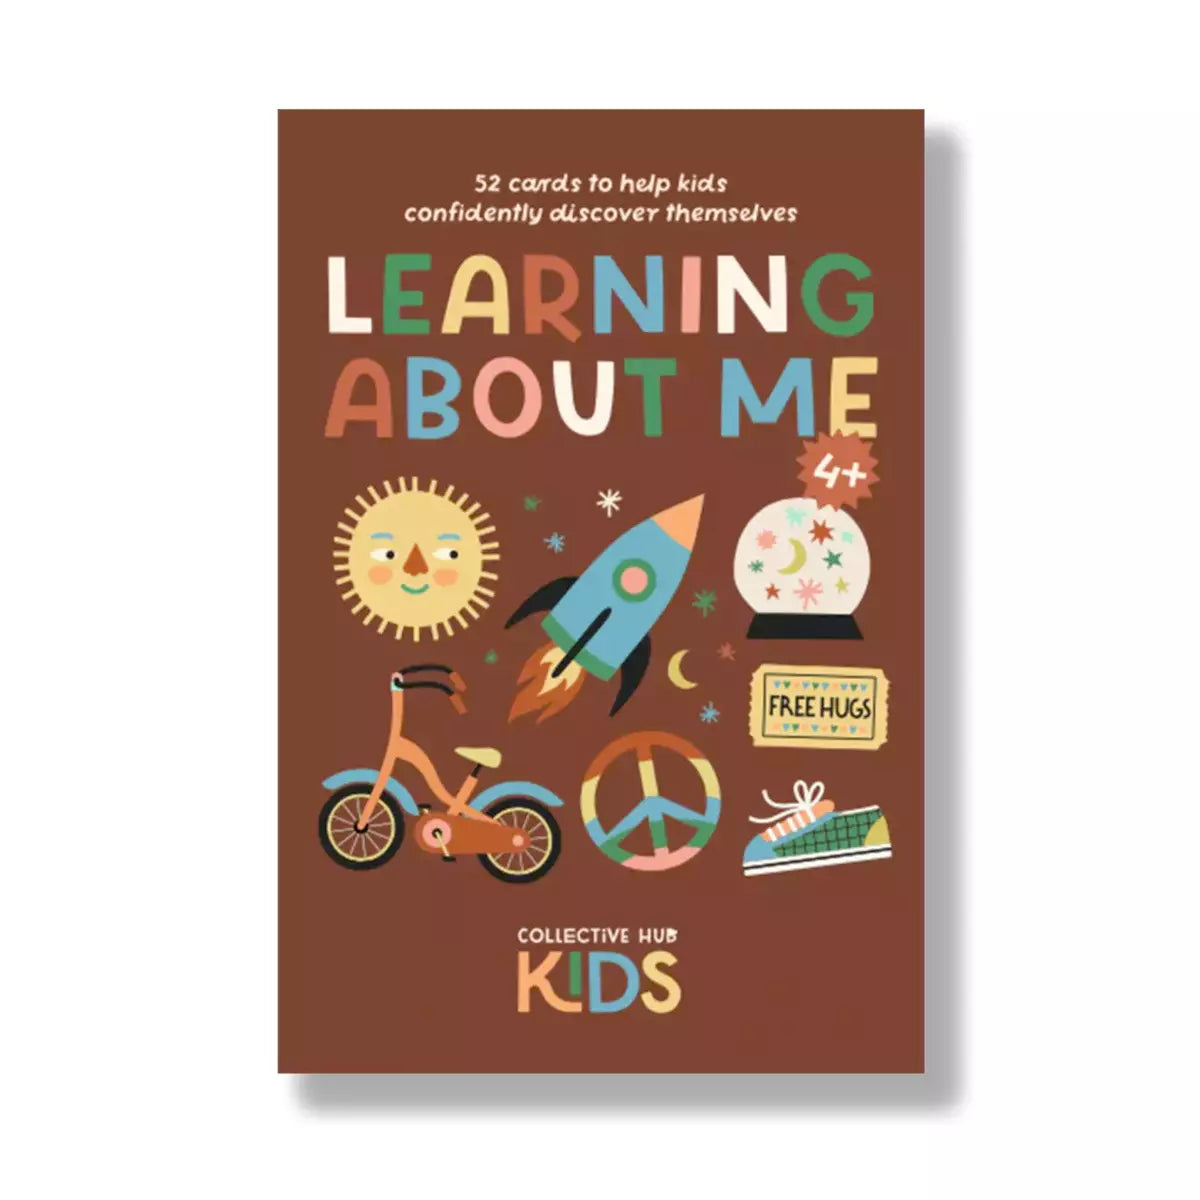 Develop and discover themselves with a Learning About Me book from Collective Hub.